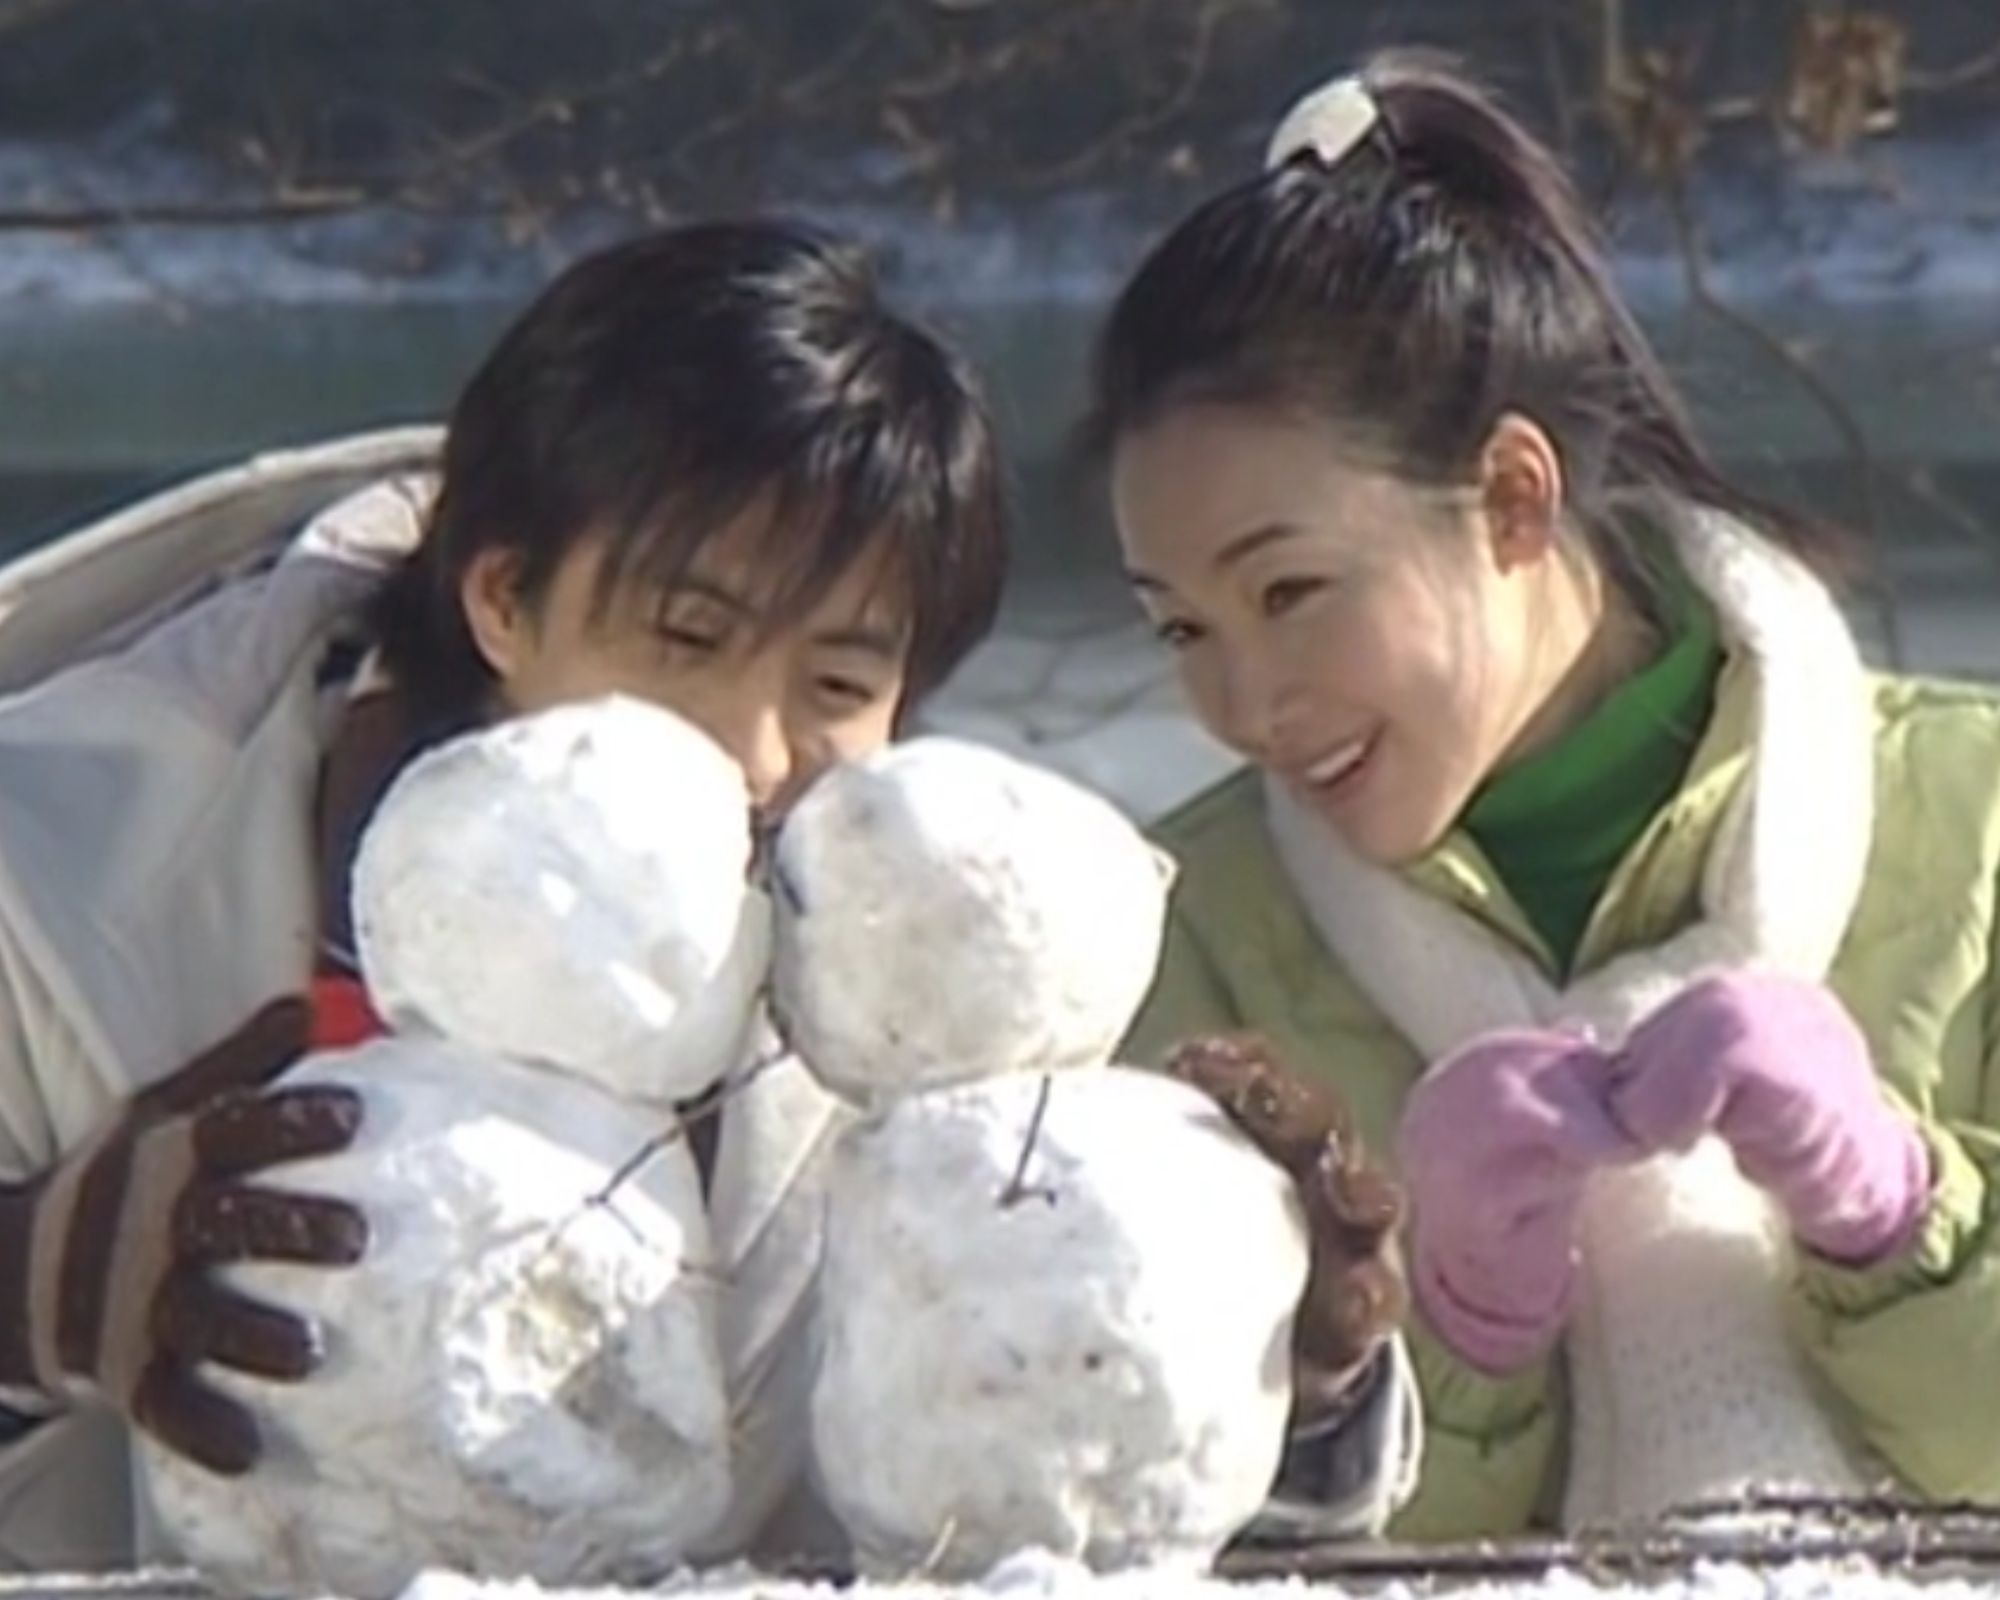 Winter Sonata - Unspoiled Review
